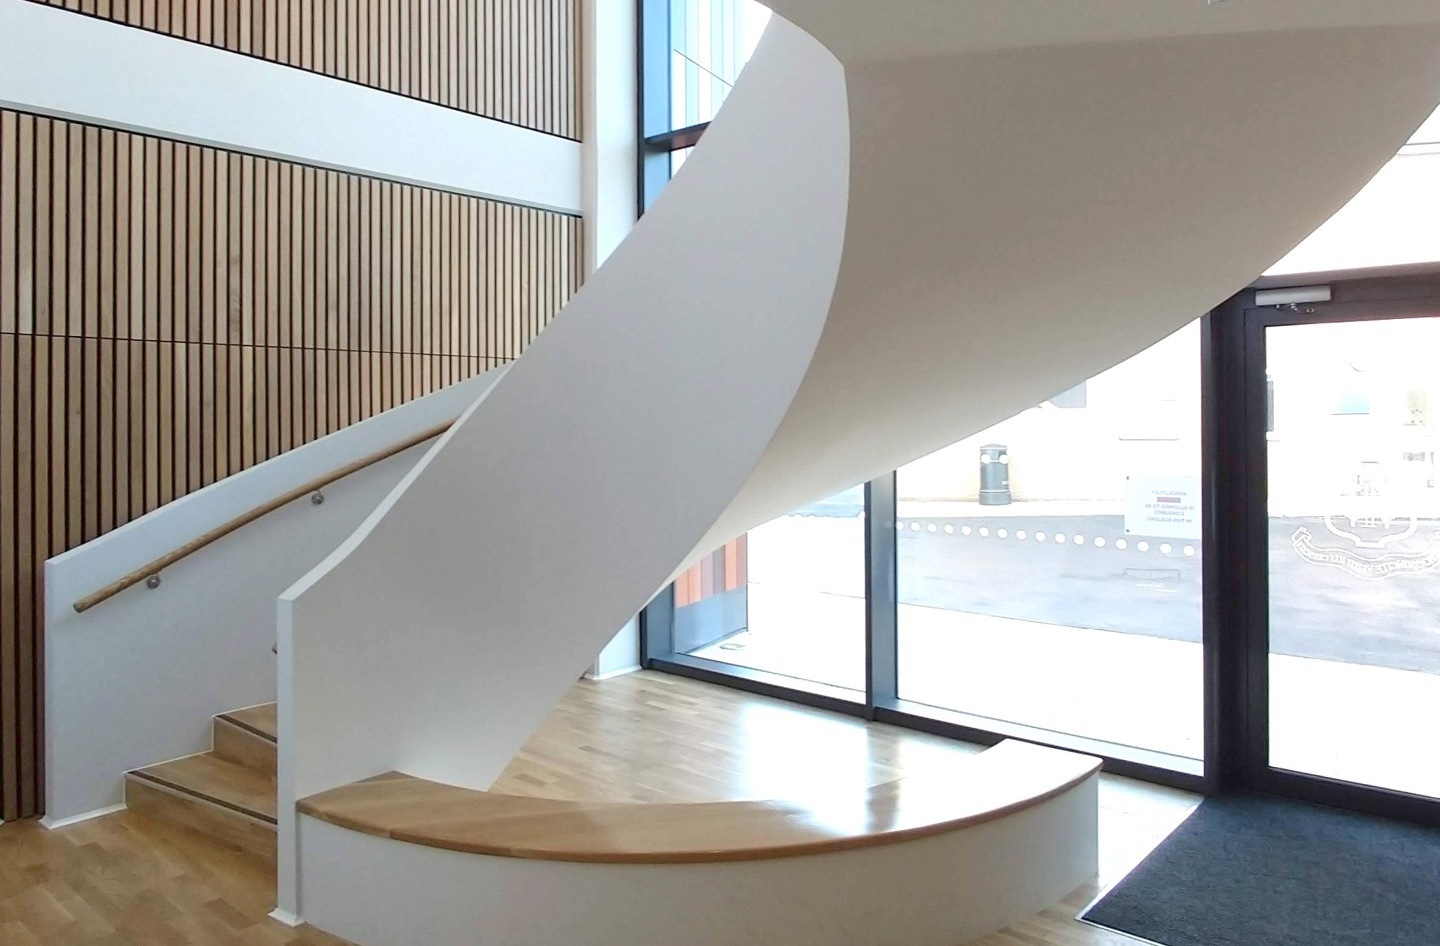 St Helen's School of Music - Feature stair interior view